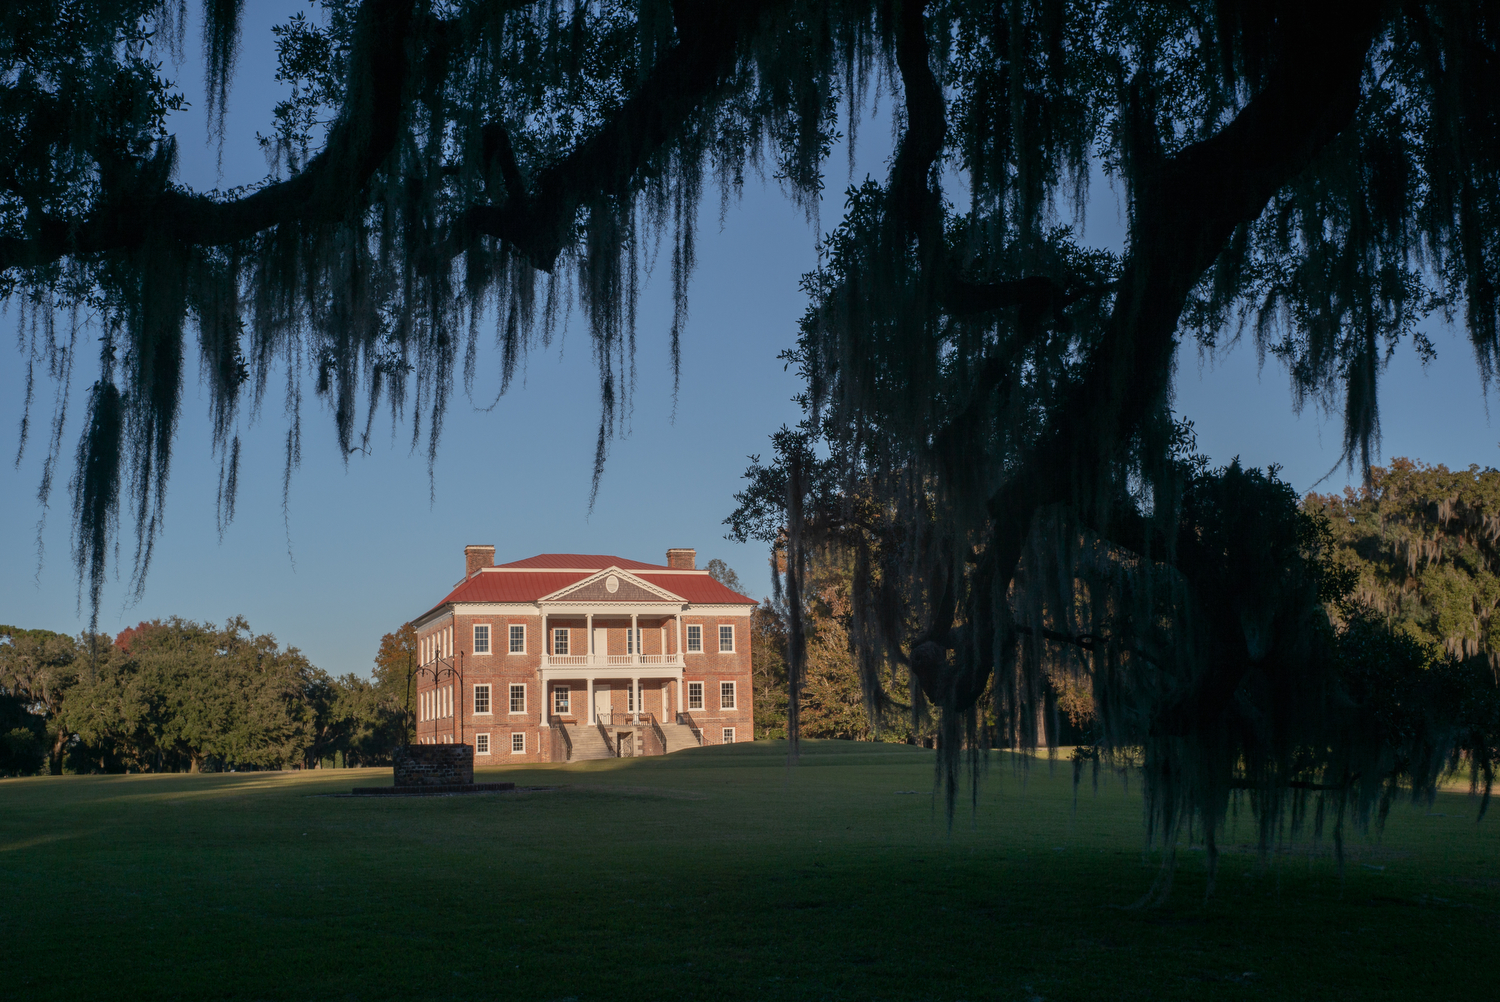 The main house at Drayton Hall, a former 350-acre plantation in Charleston, South Carolina, was purchased by John Drayton in 1738. Drayton's son Charles described the plantation's indigo production in his 1793 diary, one of the only written records.